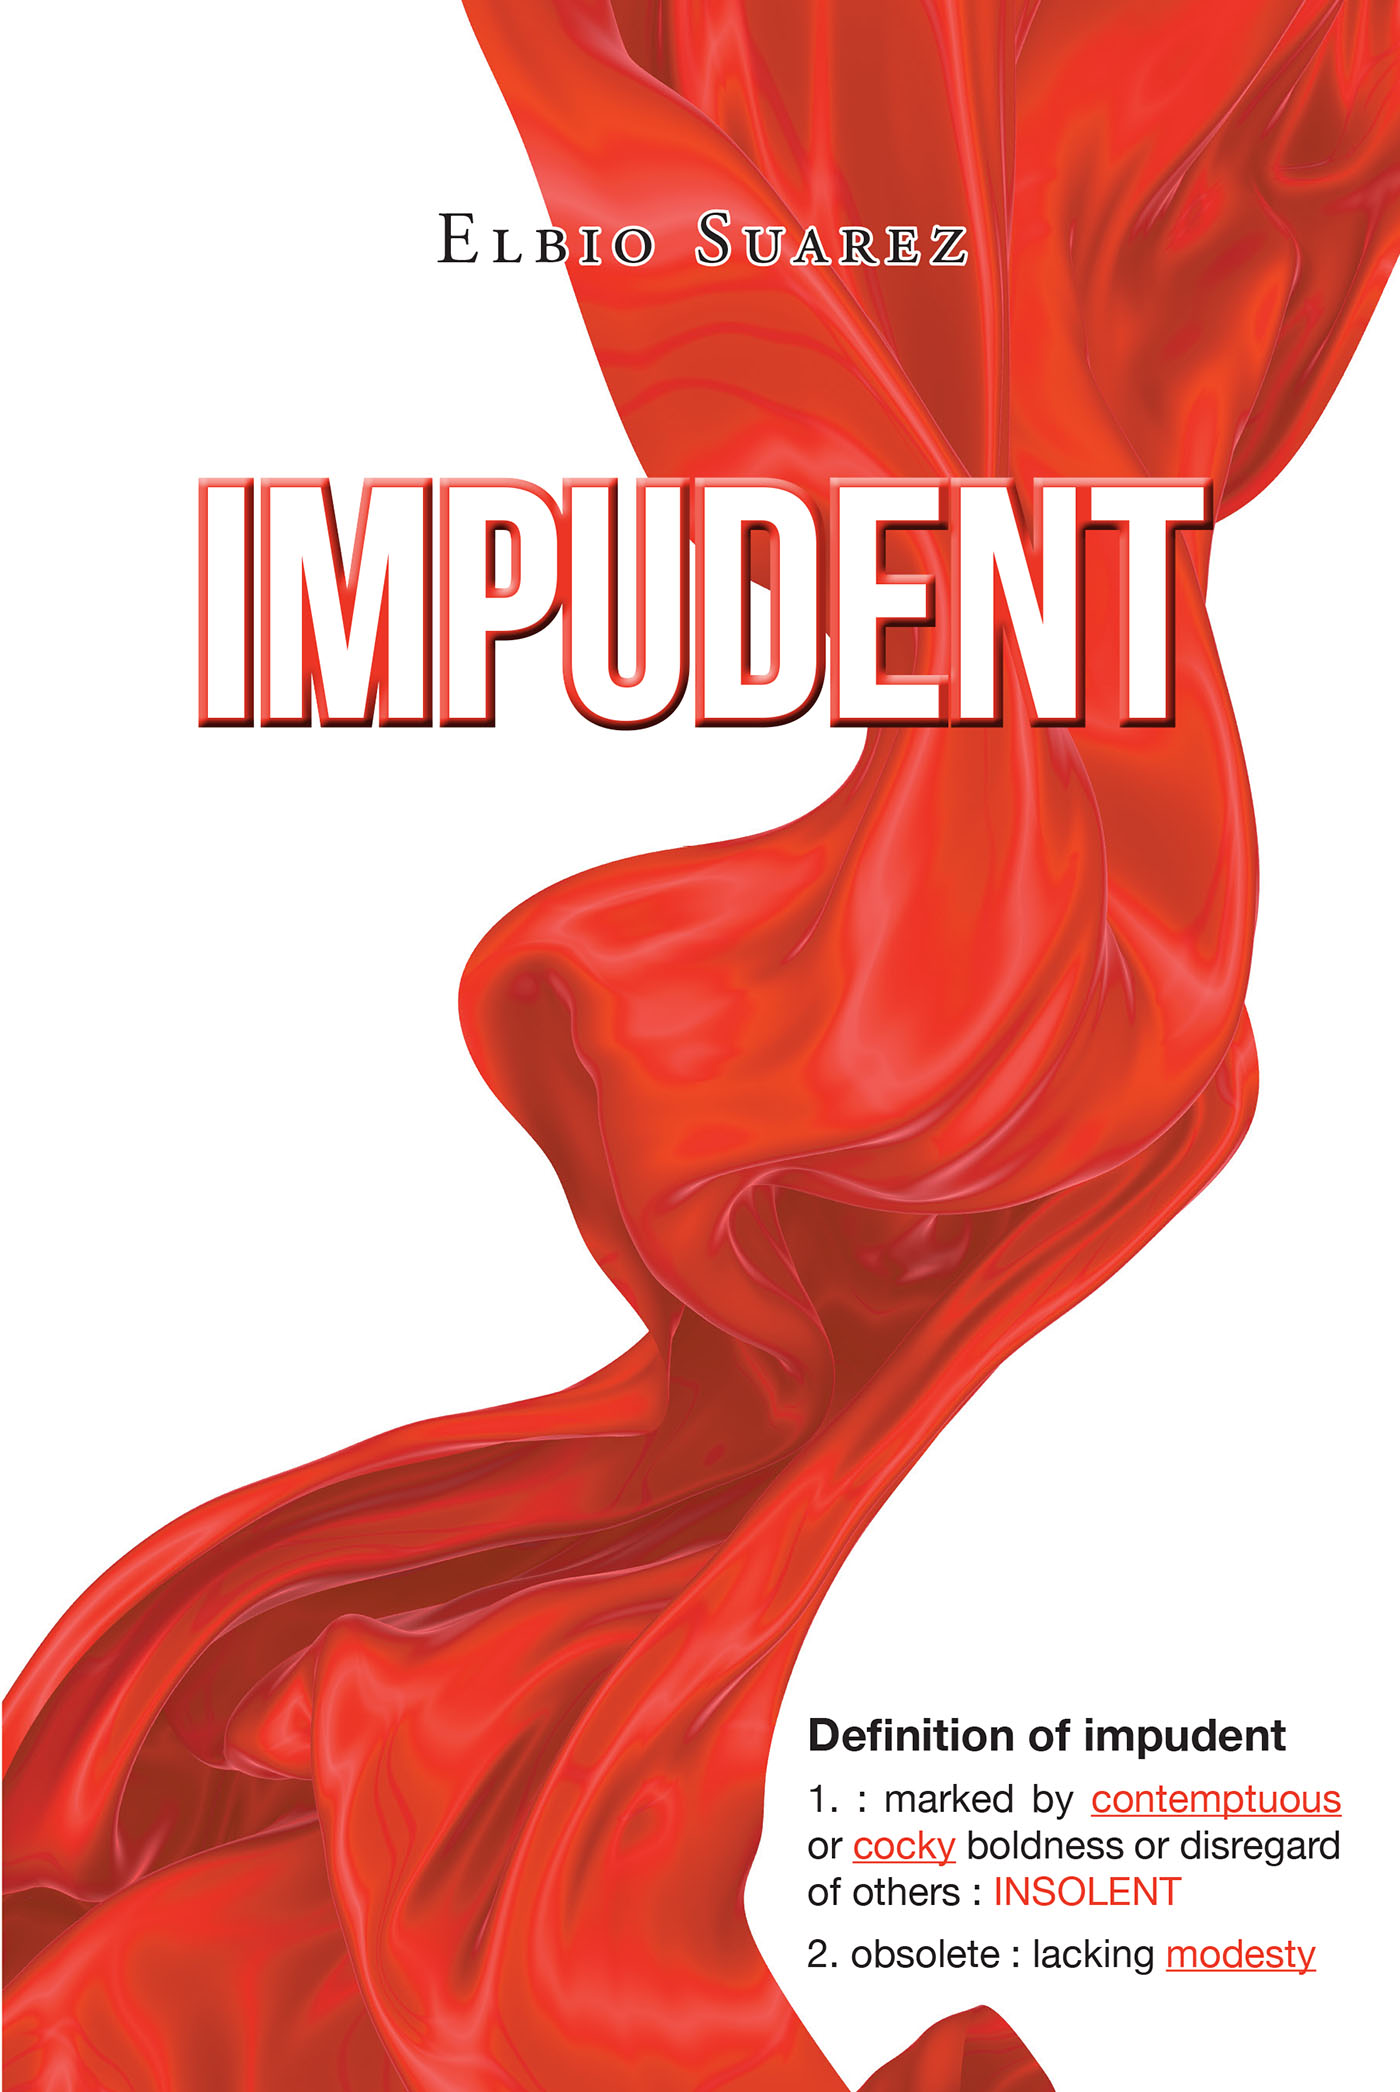 Elbio Suarez’s Newly Released "Impudent" is a Moving Analysis of Faith and the Modern Christian Experience